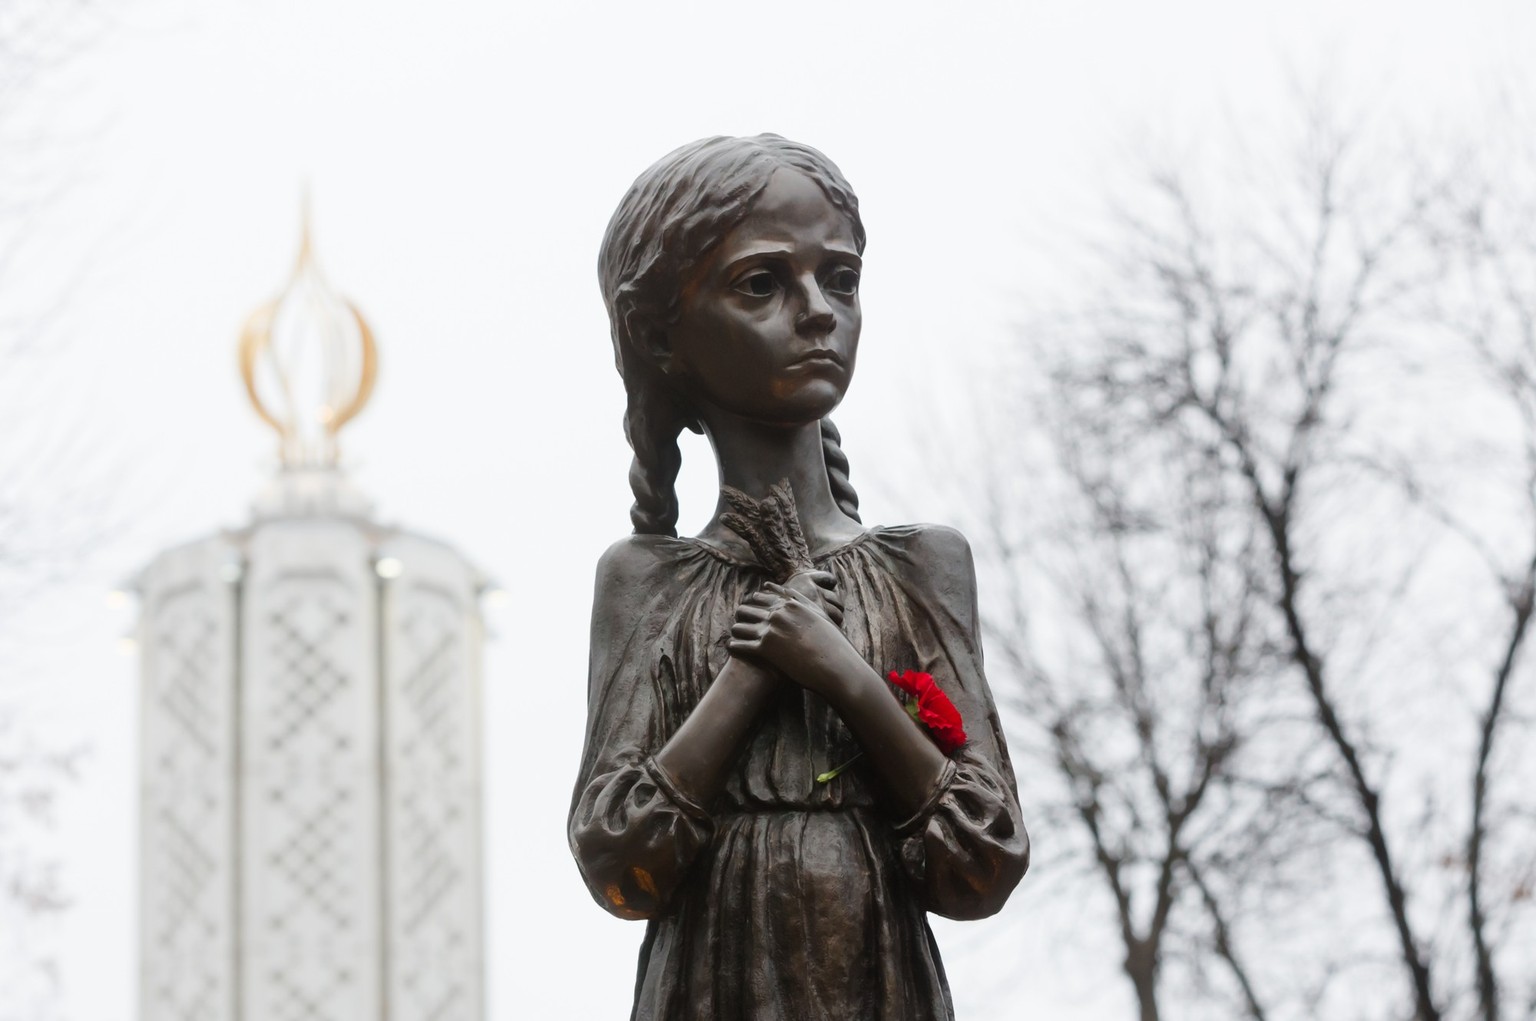 KIEV, UKRAINE - Nov 26, 2016: Monument to victims of Holodomor. Ceremony of commemoration of victims of the famine-genocide of 1923-1933 years in the Ukraine